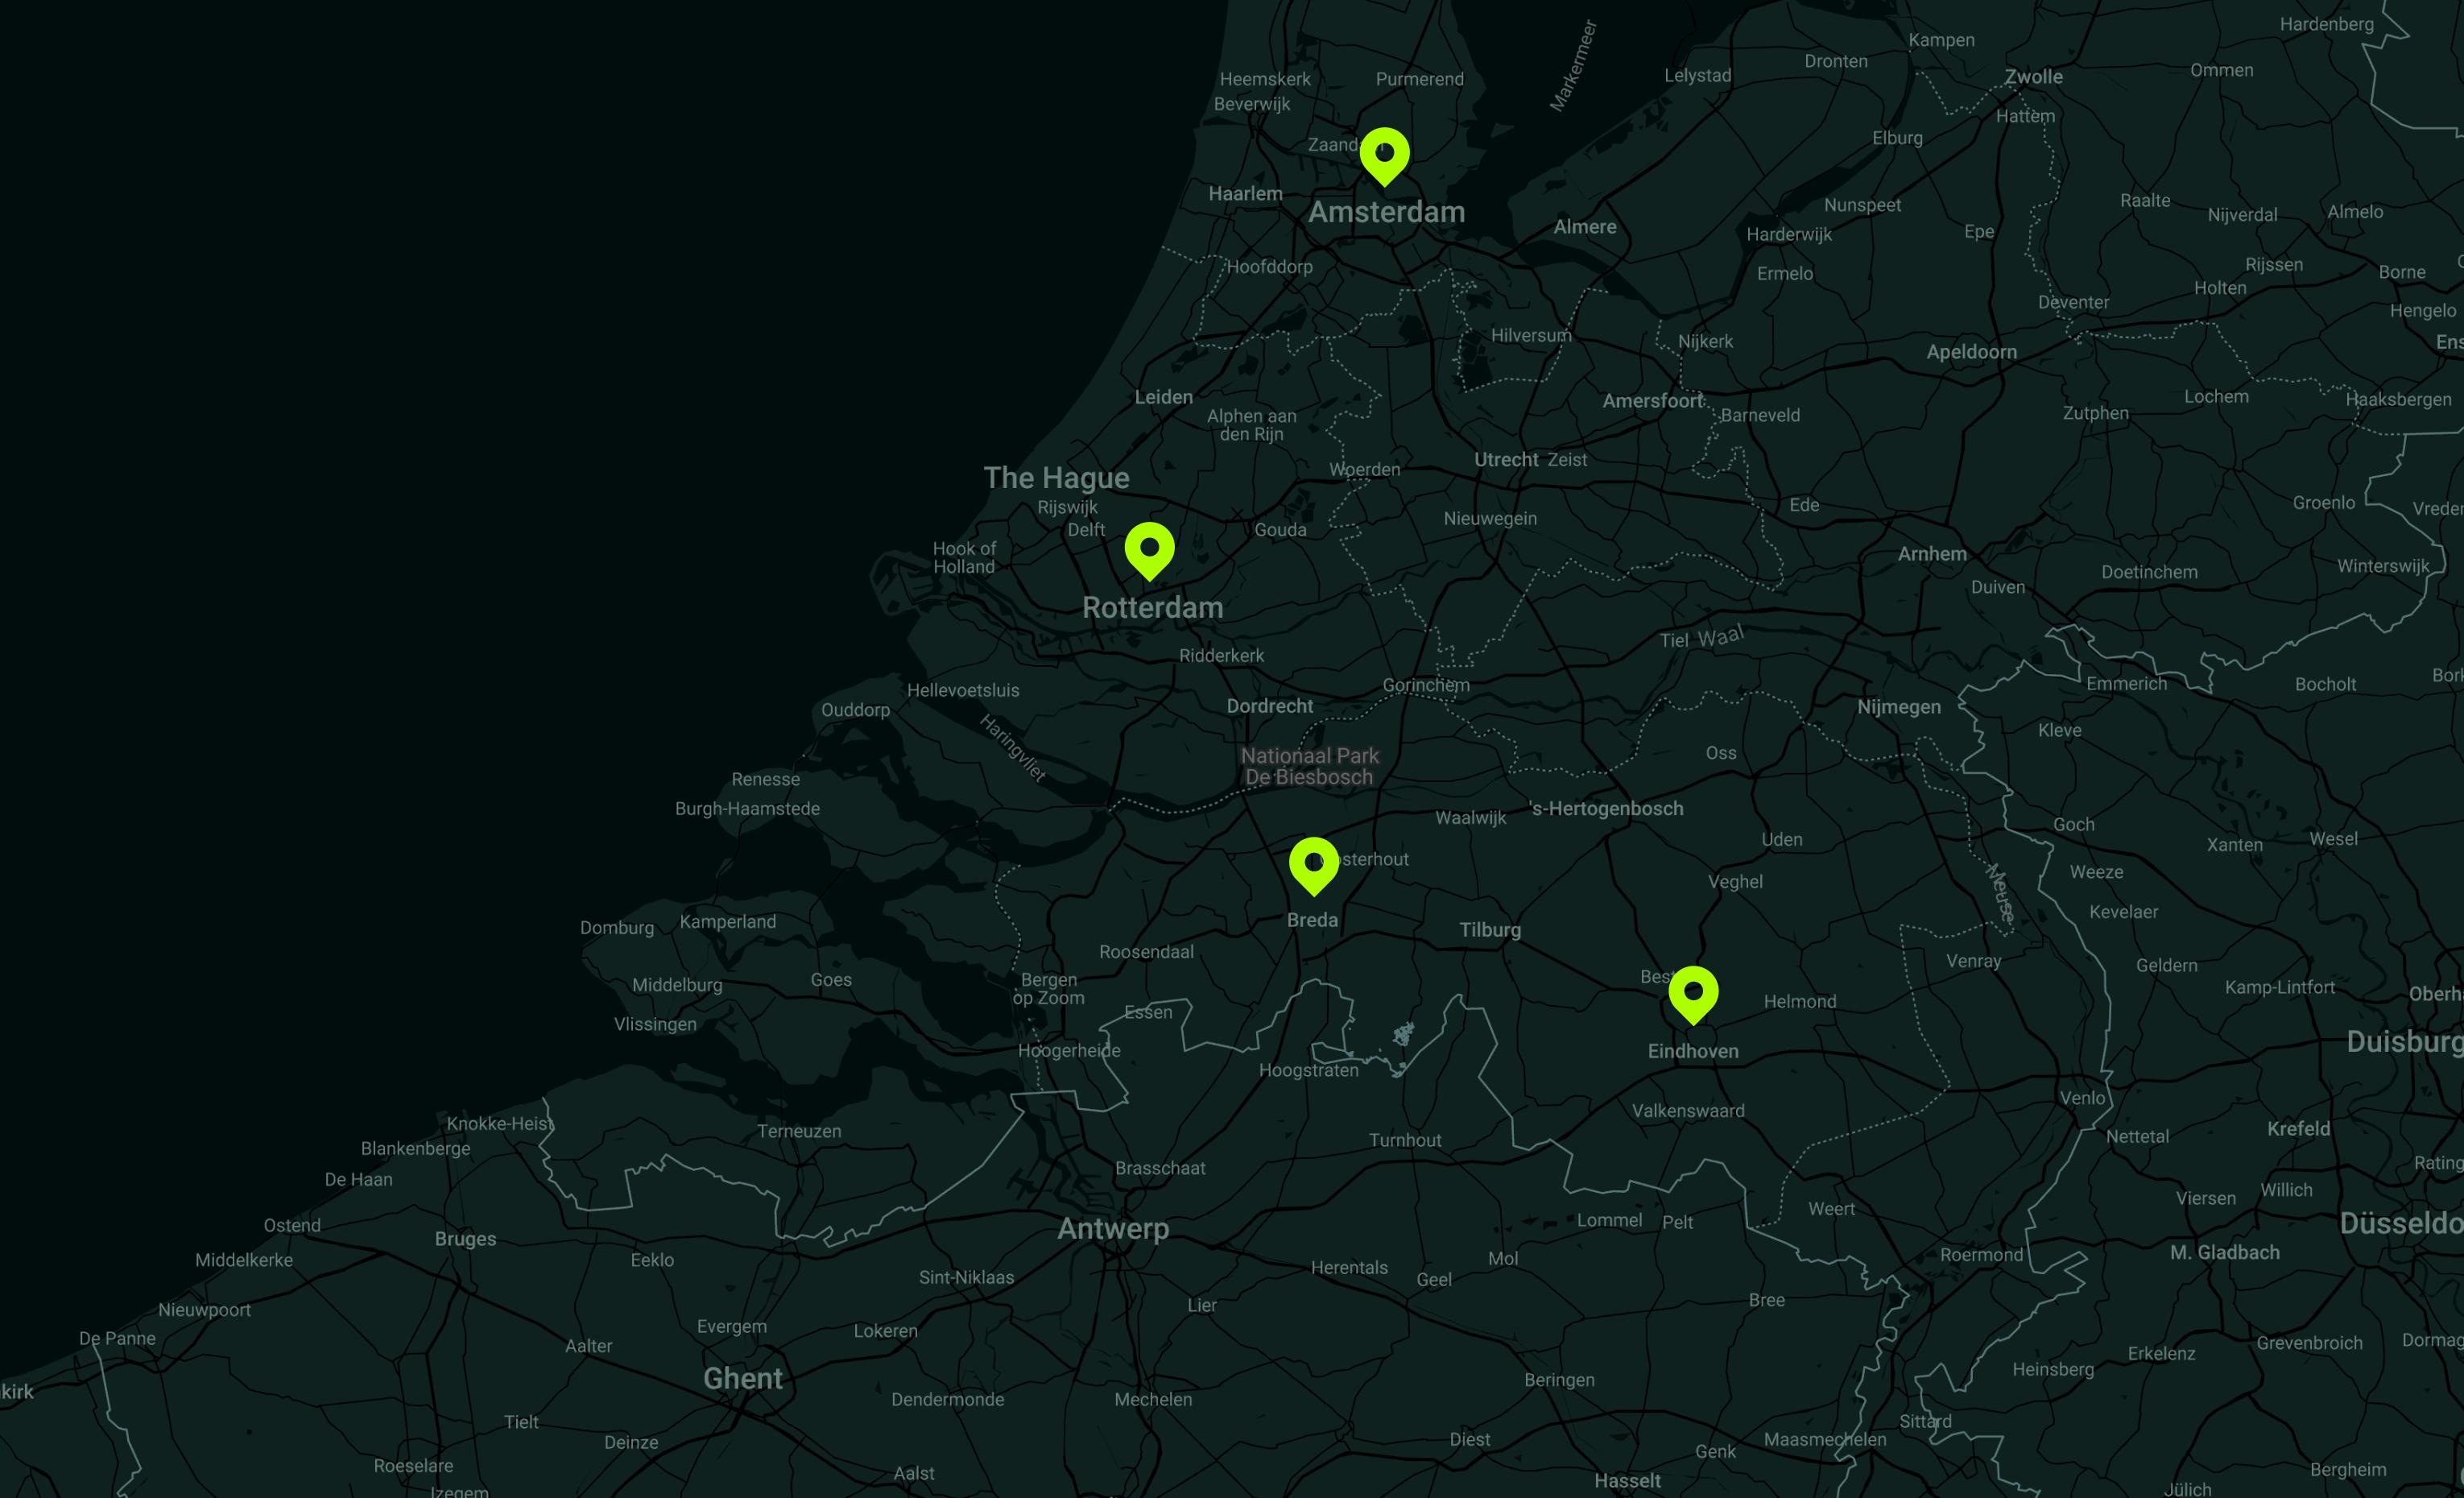 Map of 4 locations in Breda, Eindhoven, Rotterdam and Amsterdam